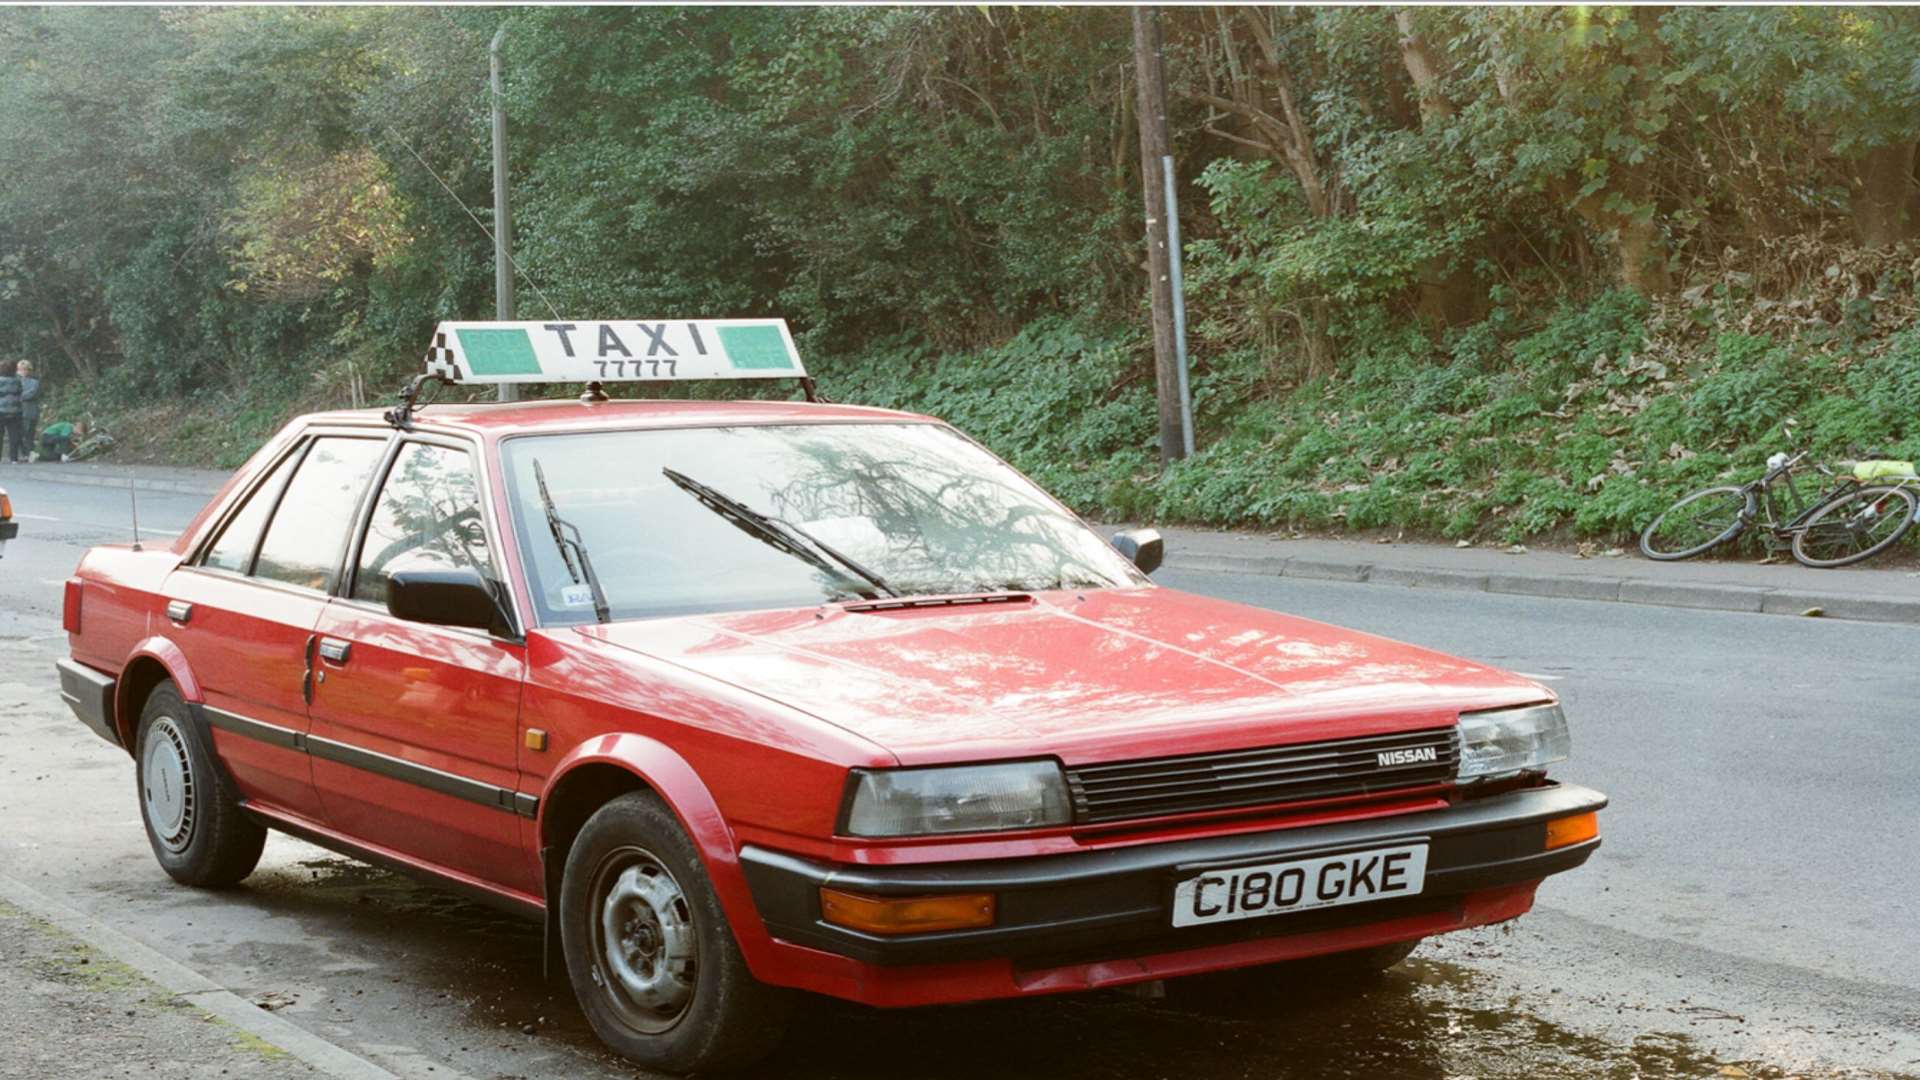 Mr Brann's taxi was found abandoned in Sandgate on November 6, 1988. Picture: Kent Police